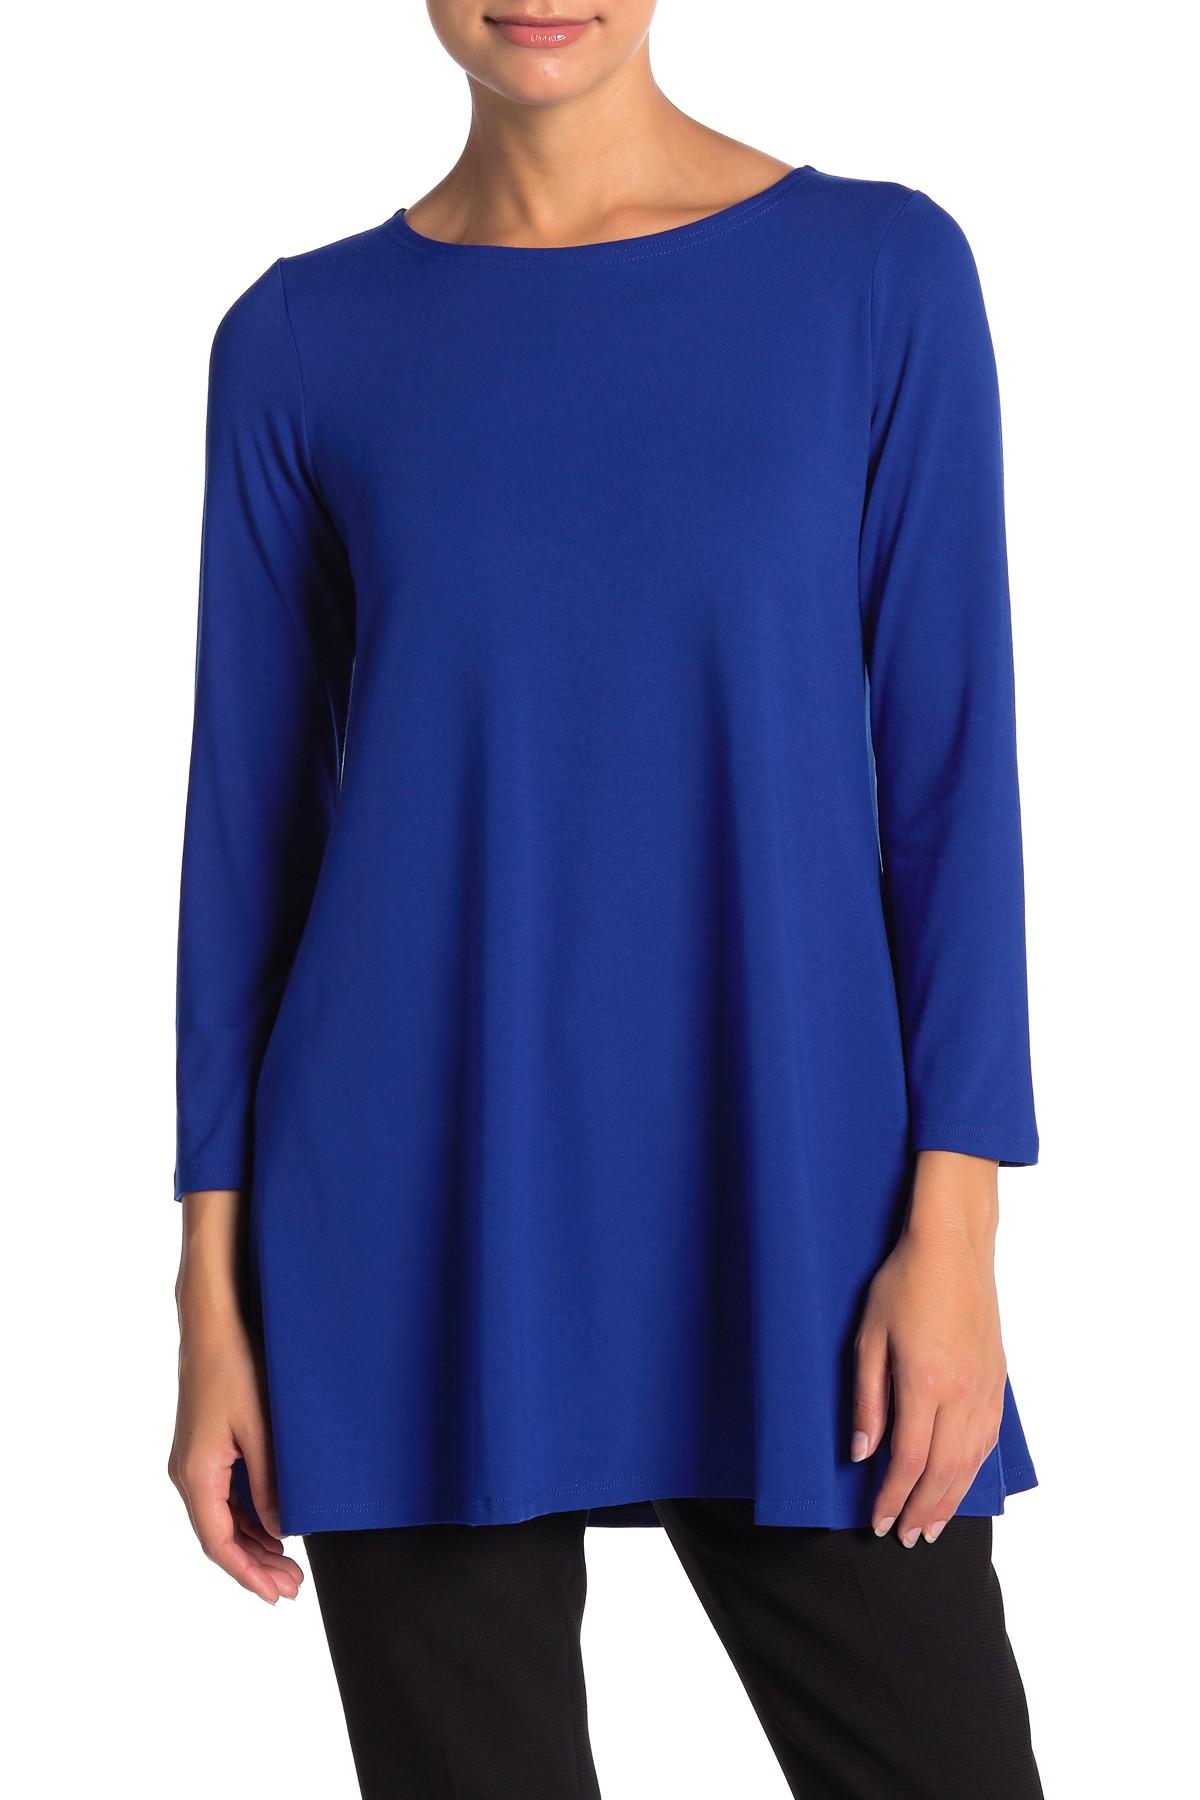 Eileen Fisher Synthetic Solid Long Sleeve Tunic Top (petite) in Blue - Lyst